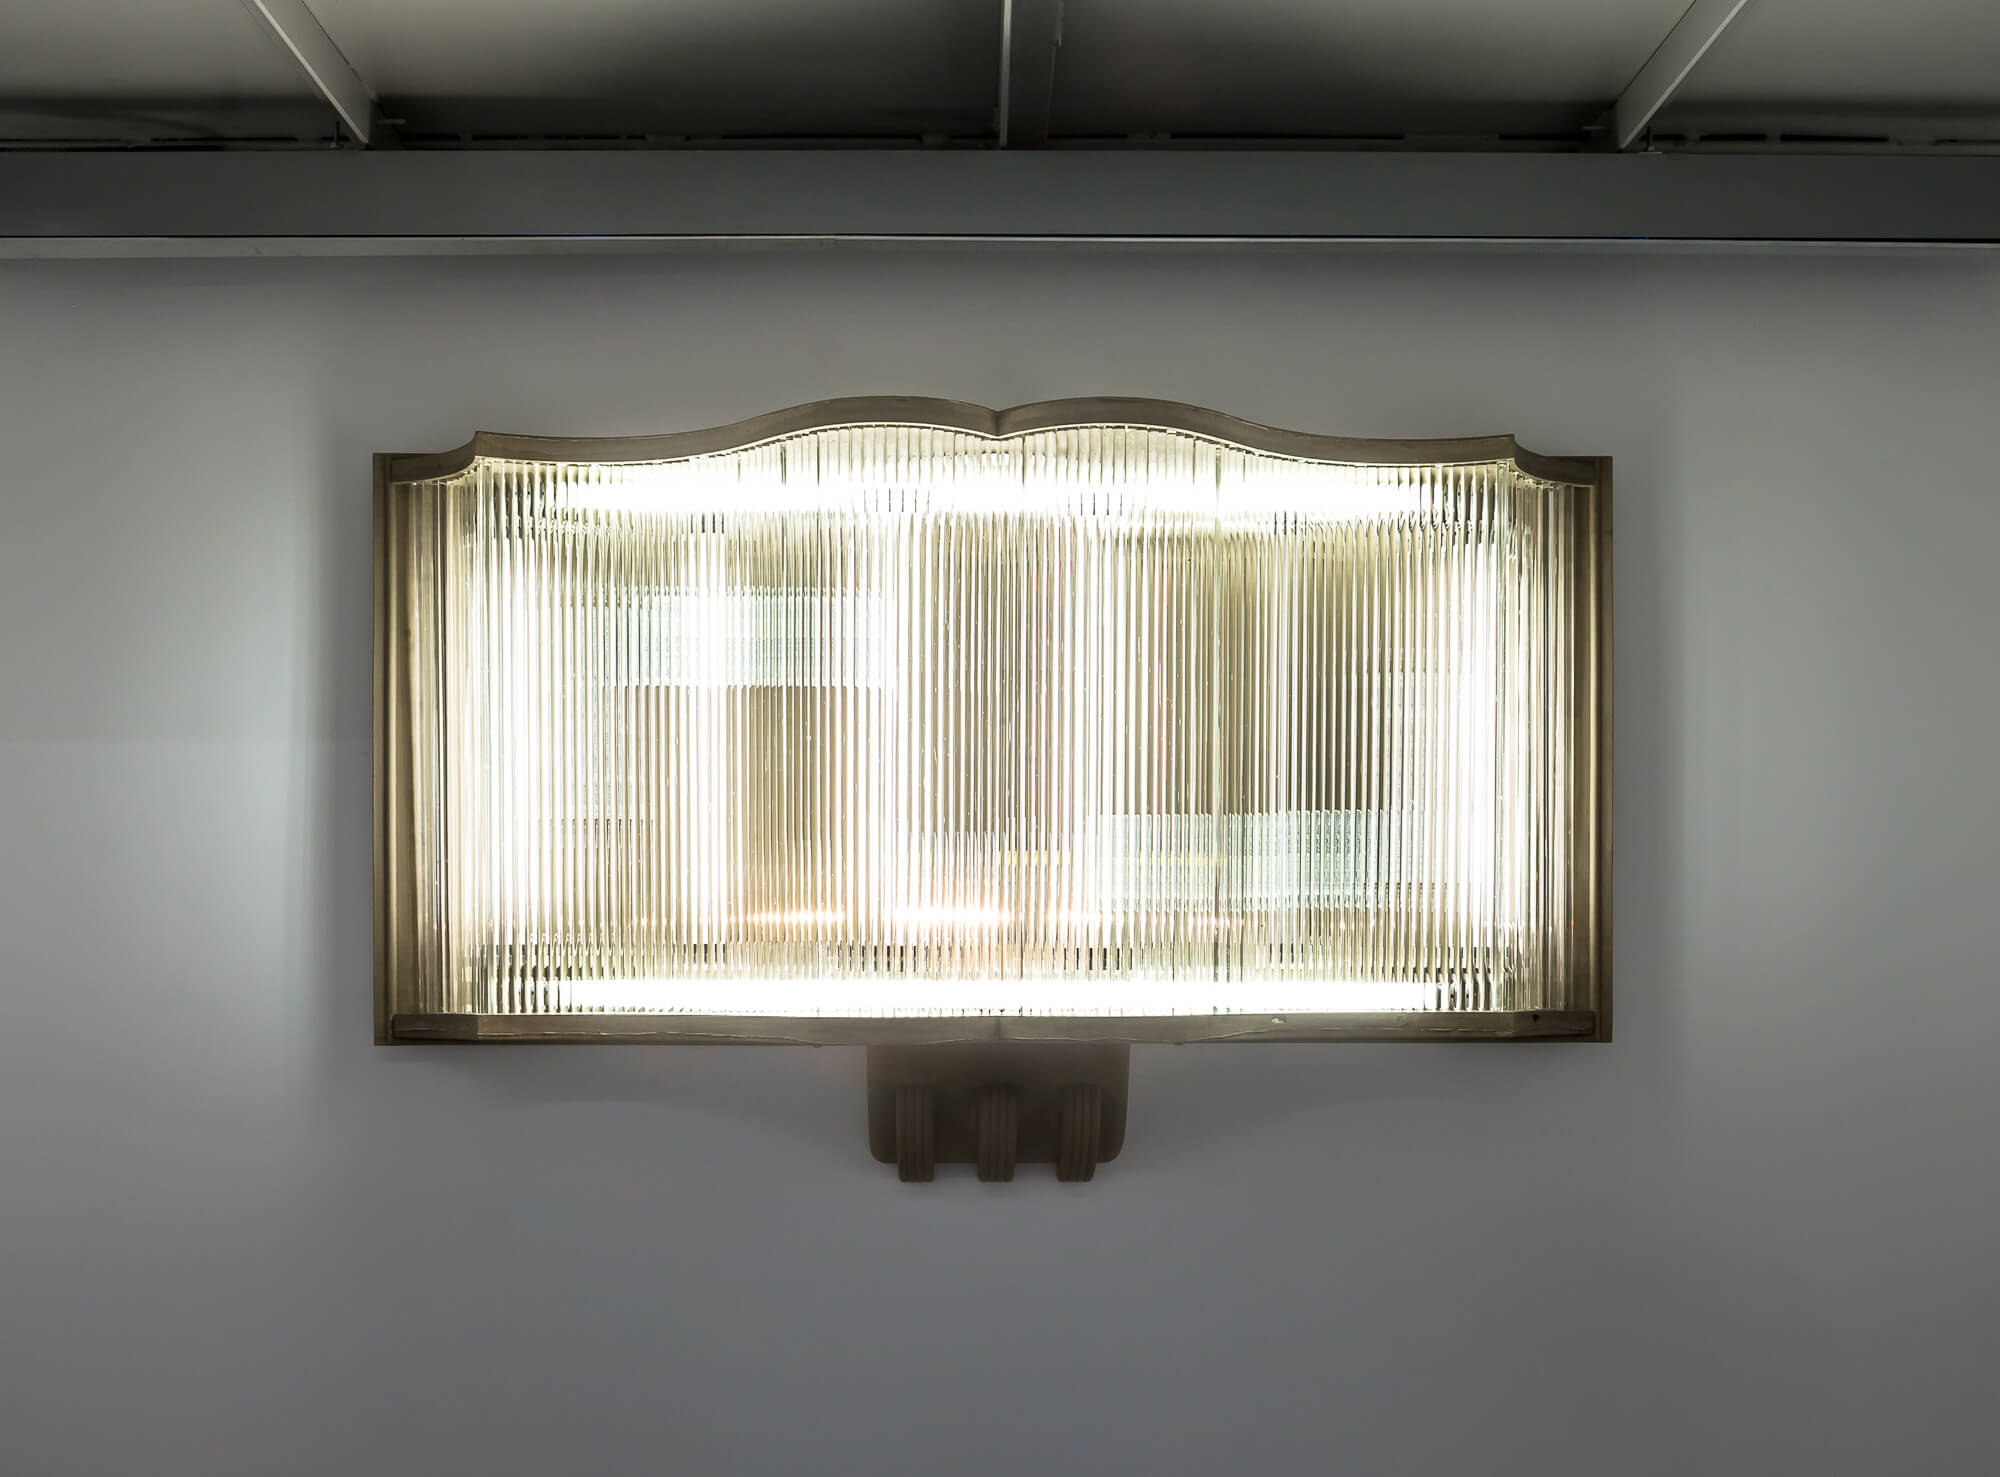 SI ONSITE Swiss Institute
Sam Lewitt, Stranded Asset, 2018. Cast fuel ash, metal hardware, clear Murano glass rods, electrical hardware, fluorescent bulbs. Courtesy of the artist and Miguel Abreu Gallery, New York.